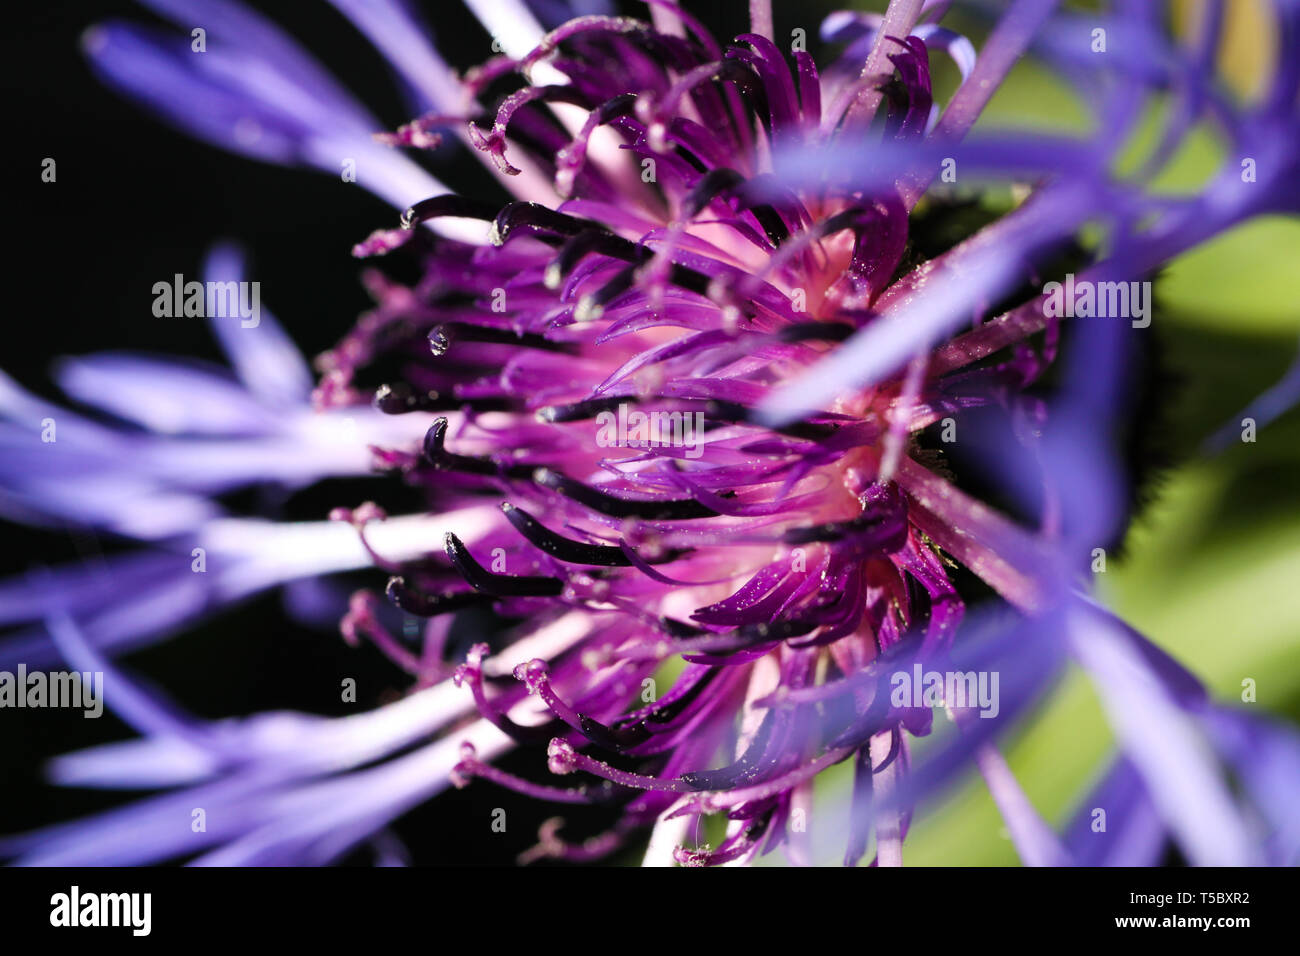 Macro close up of purple squarrose knapweed (centaurea triumfettii) with blurred green background (focus on tops of pedicels) Stock Photo